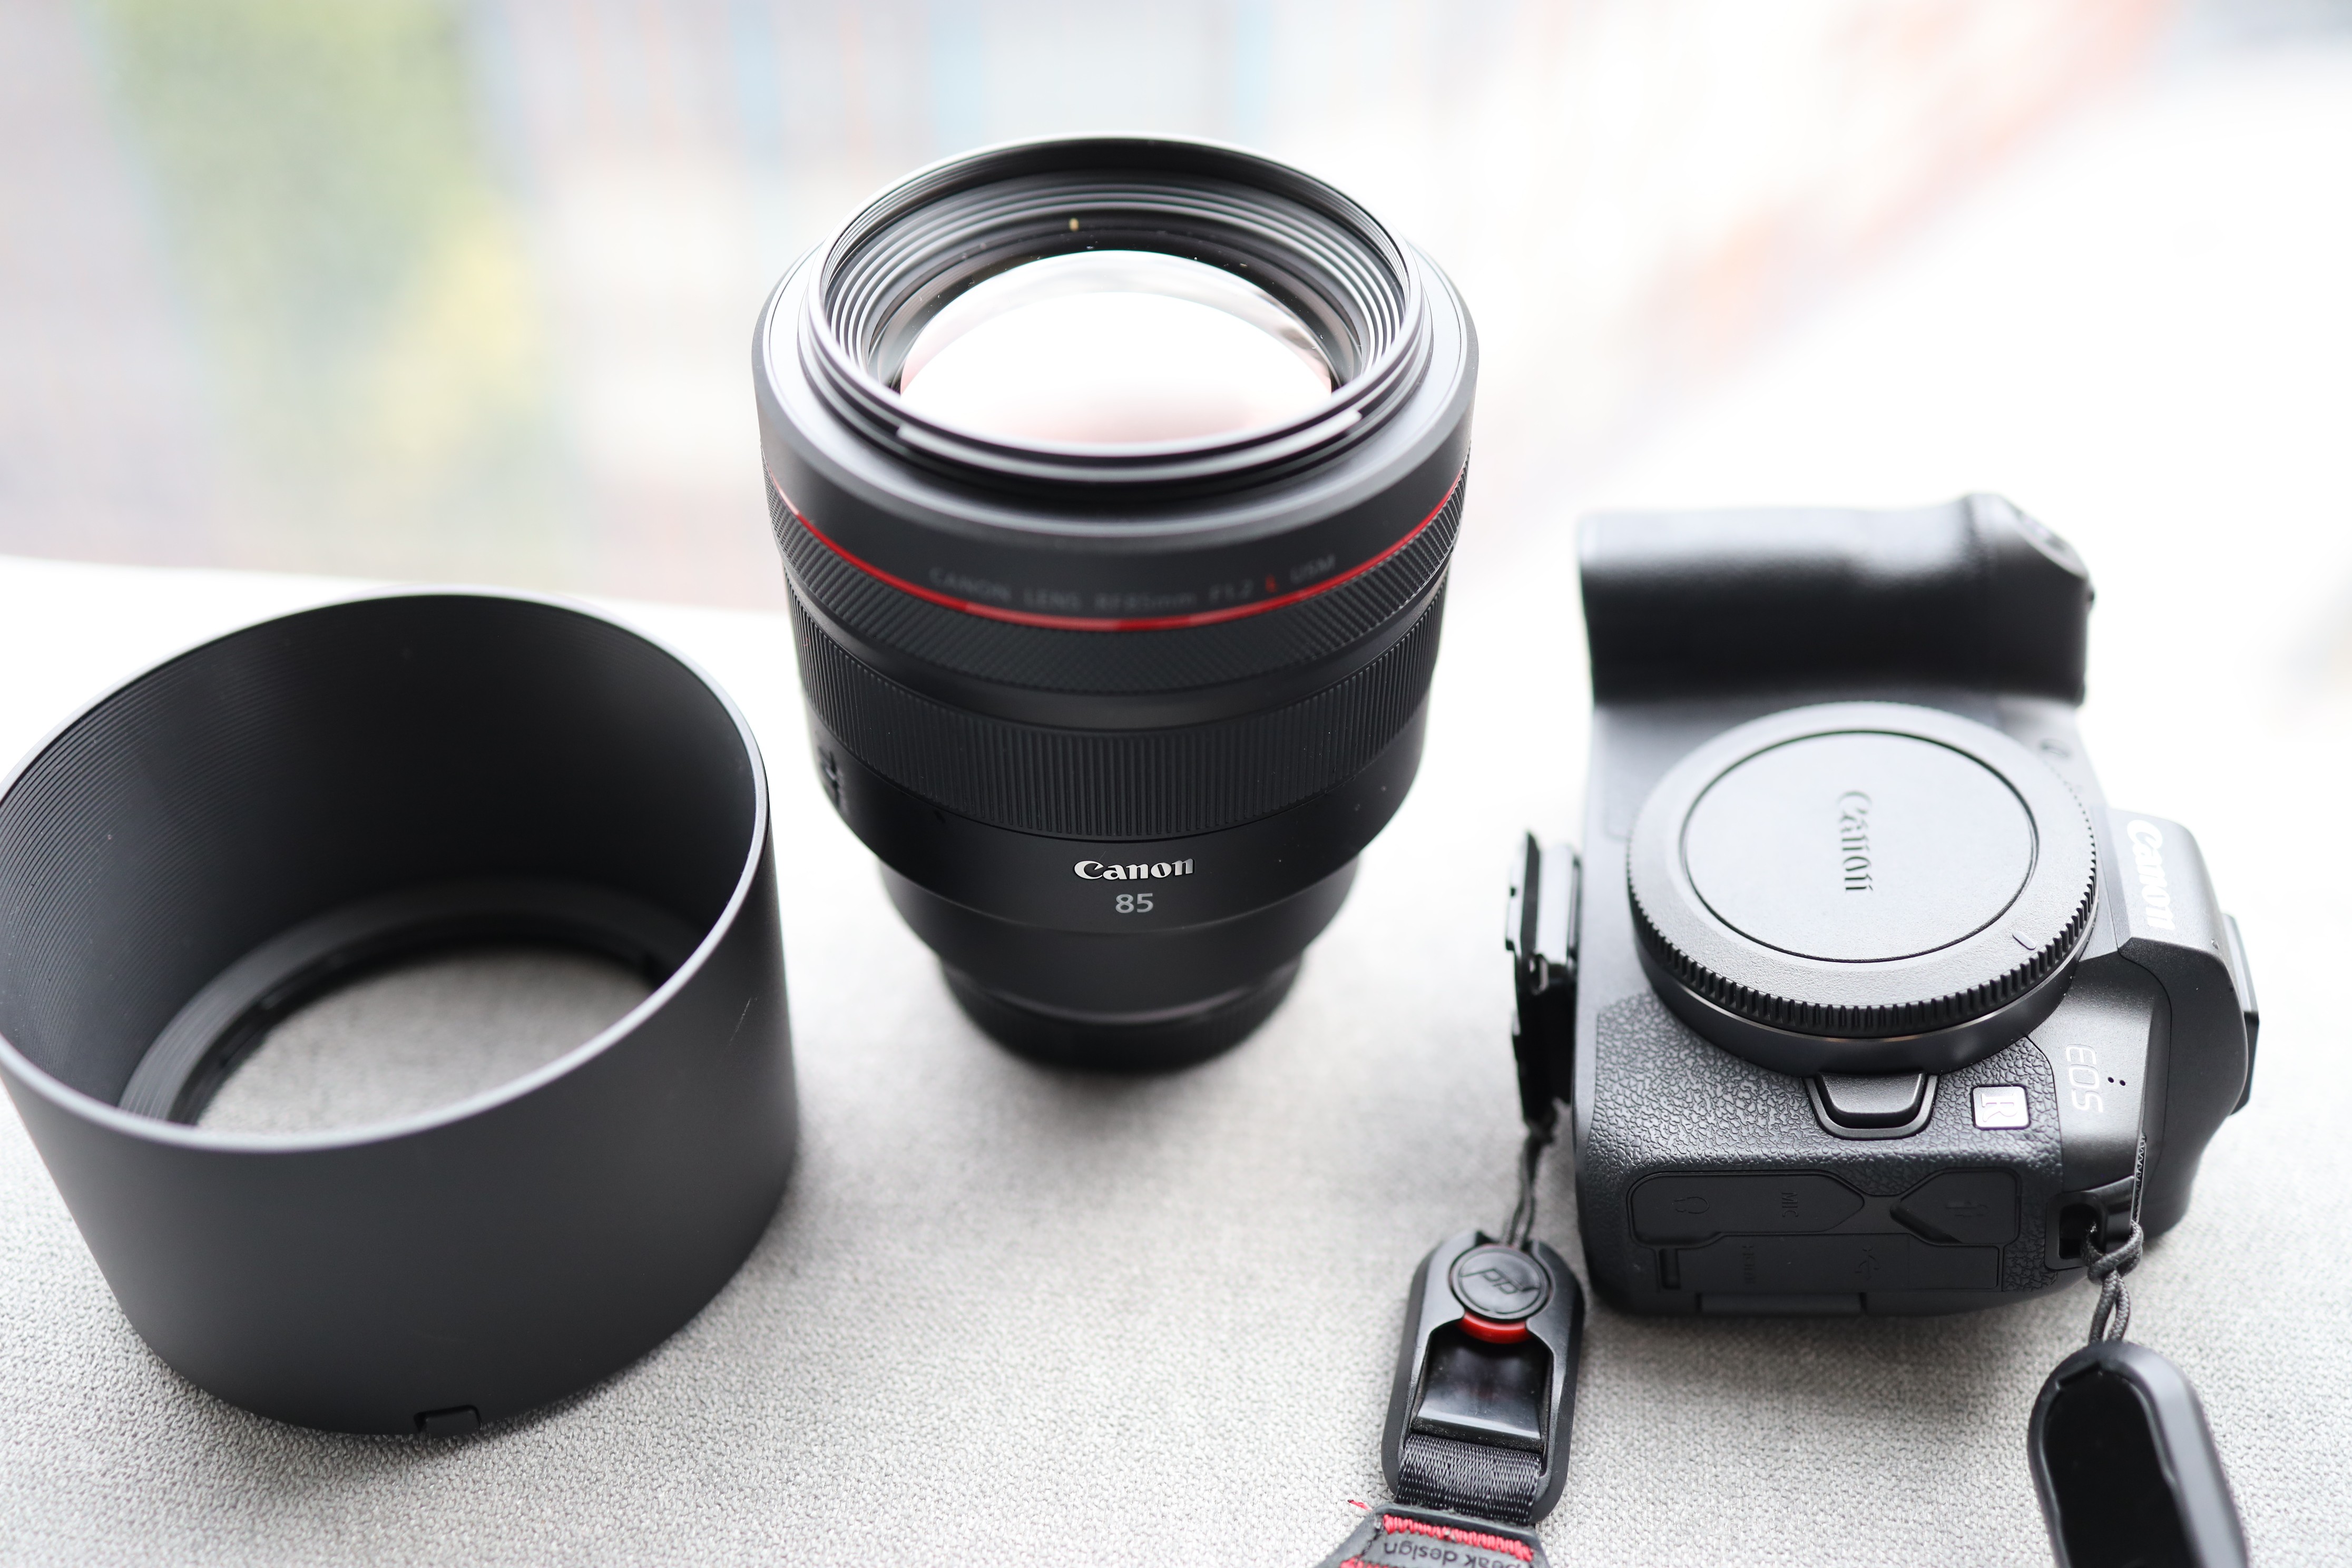 The heavyweight Canon RF 85mm F1.2 USM lens is a great addition to your camera equipment – but be prepared for some aches and pains from carrying it around. Photo: Derek Ting